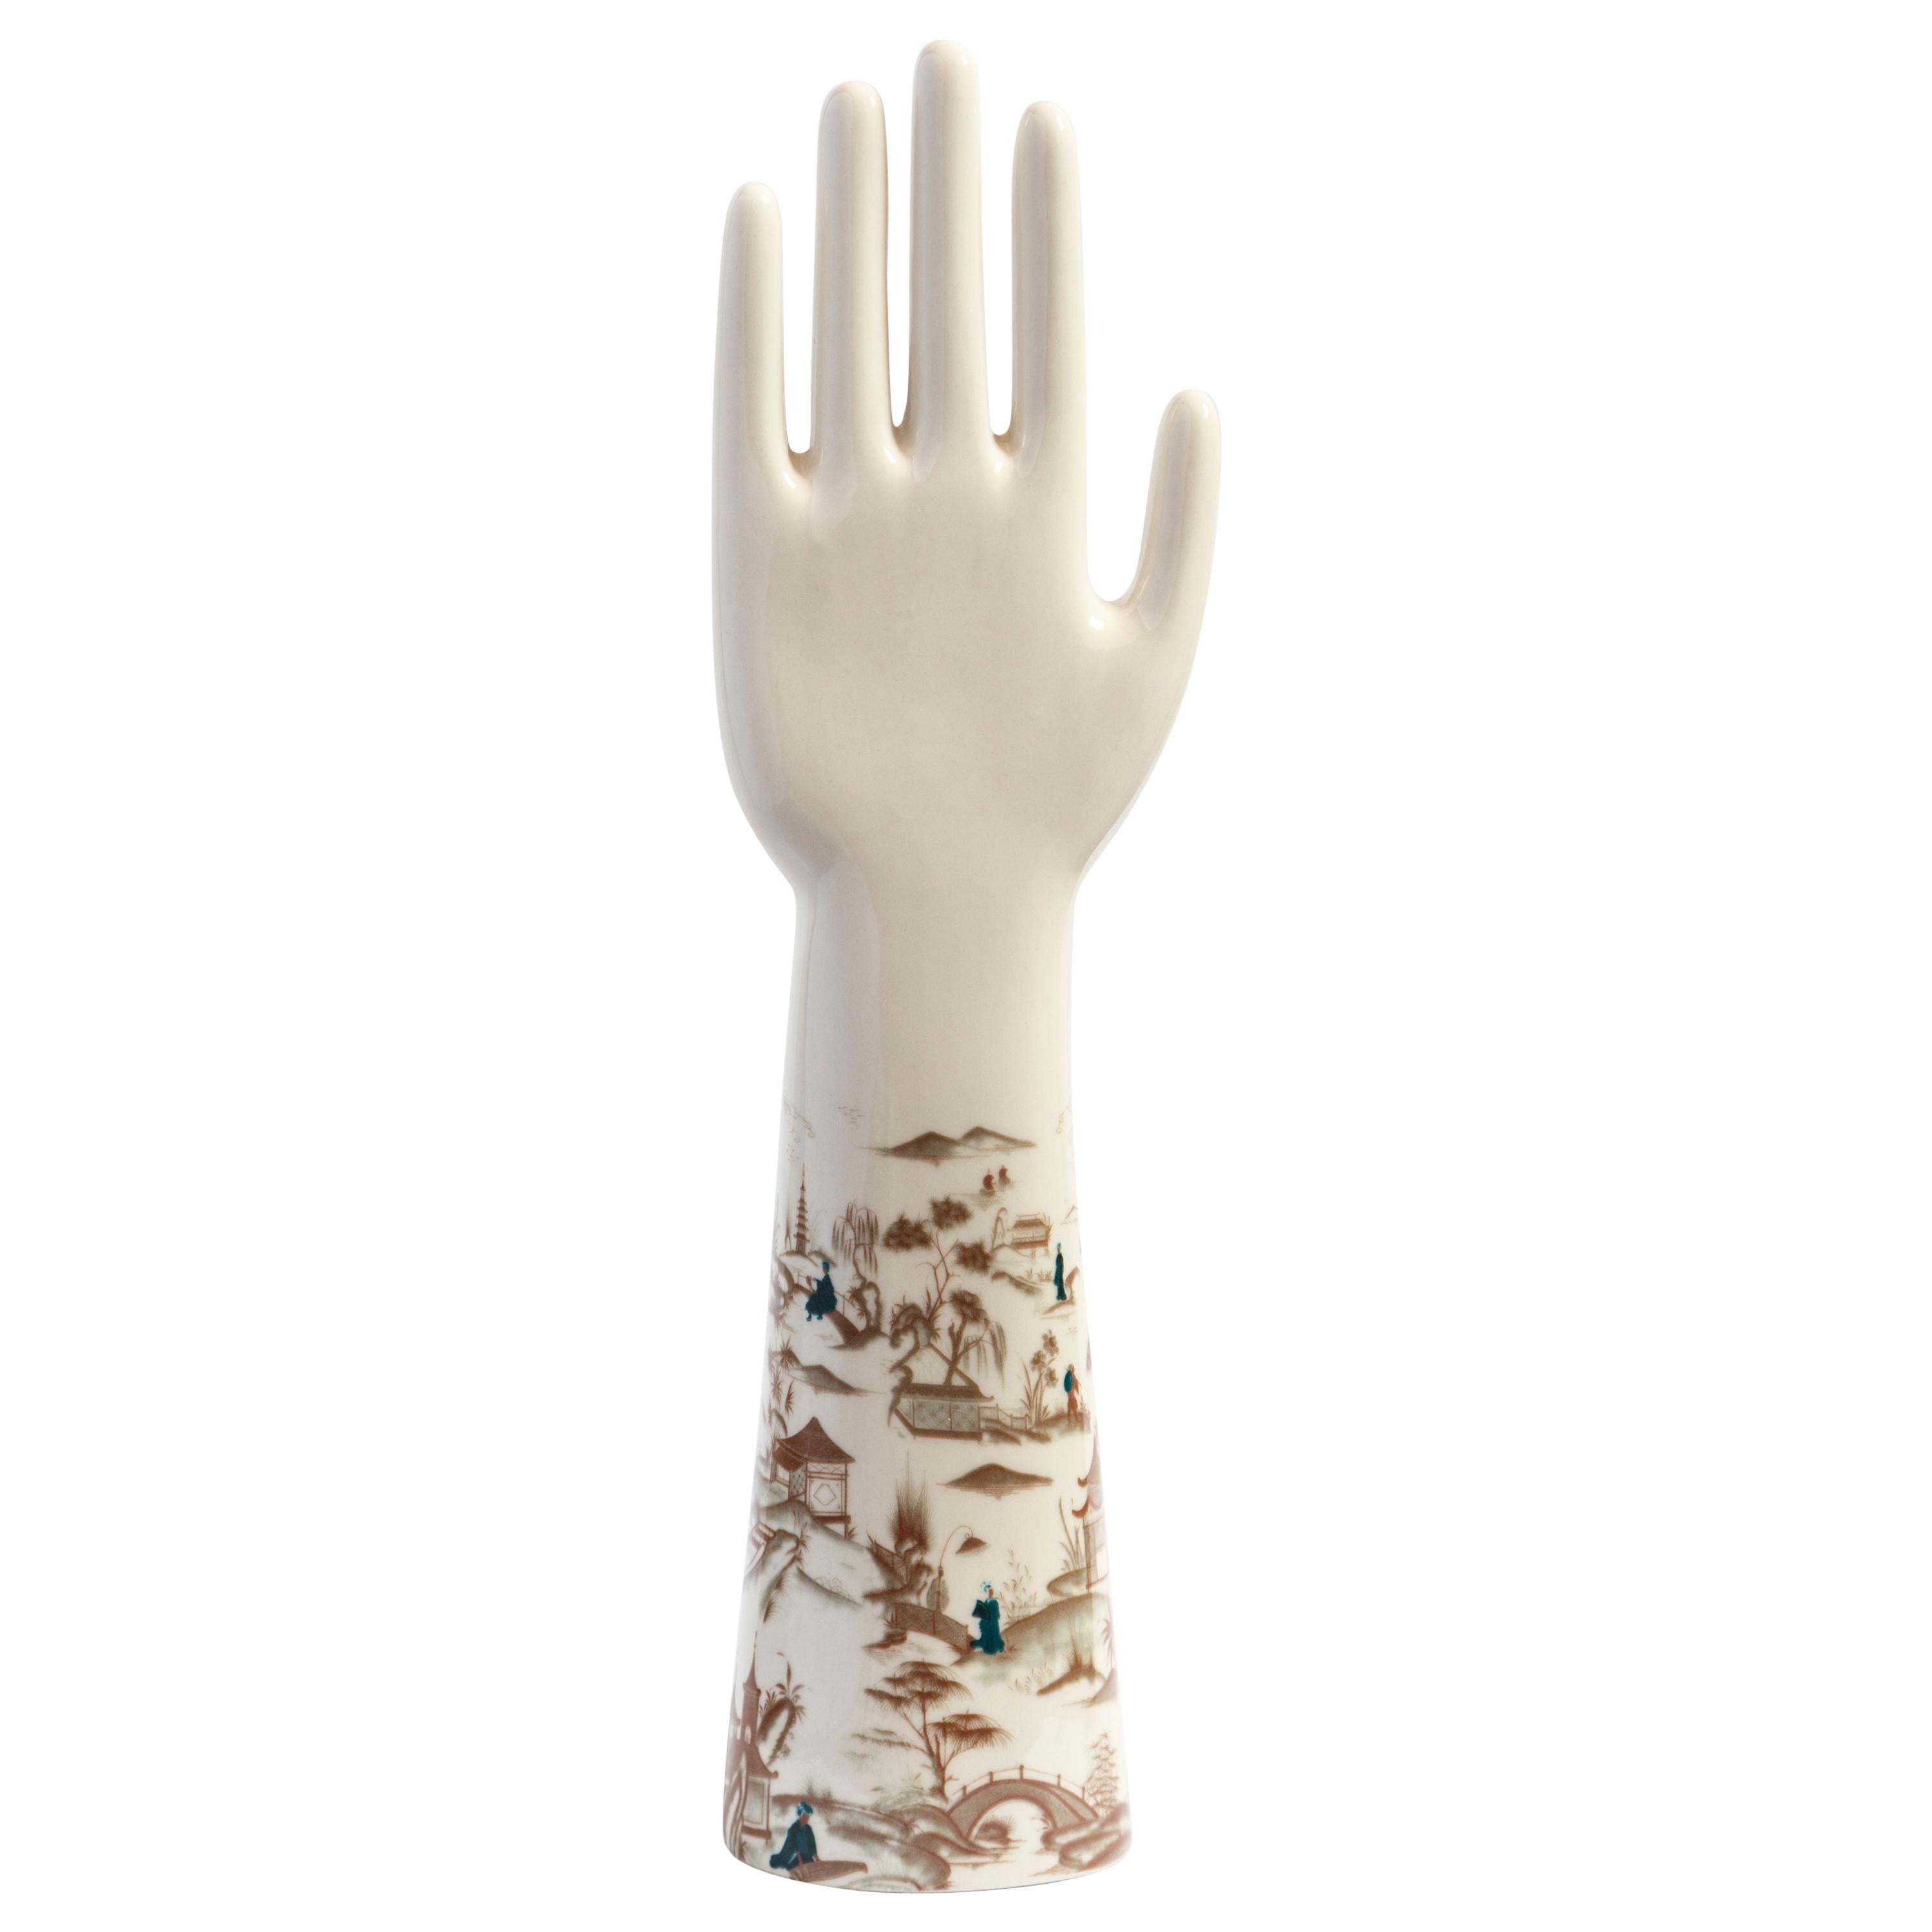 Anatomica, Porcelain Hand with Natsumi Decoration by Vito Nesta